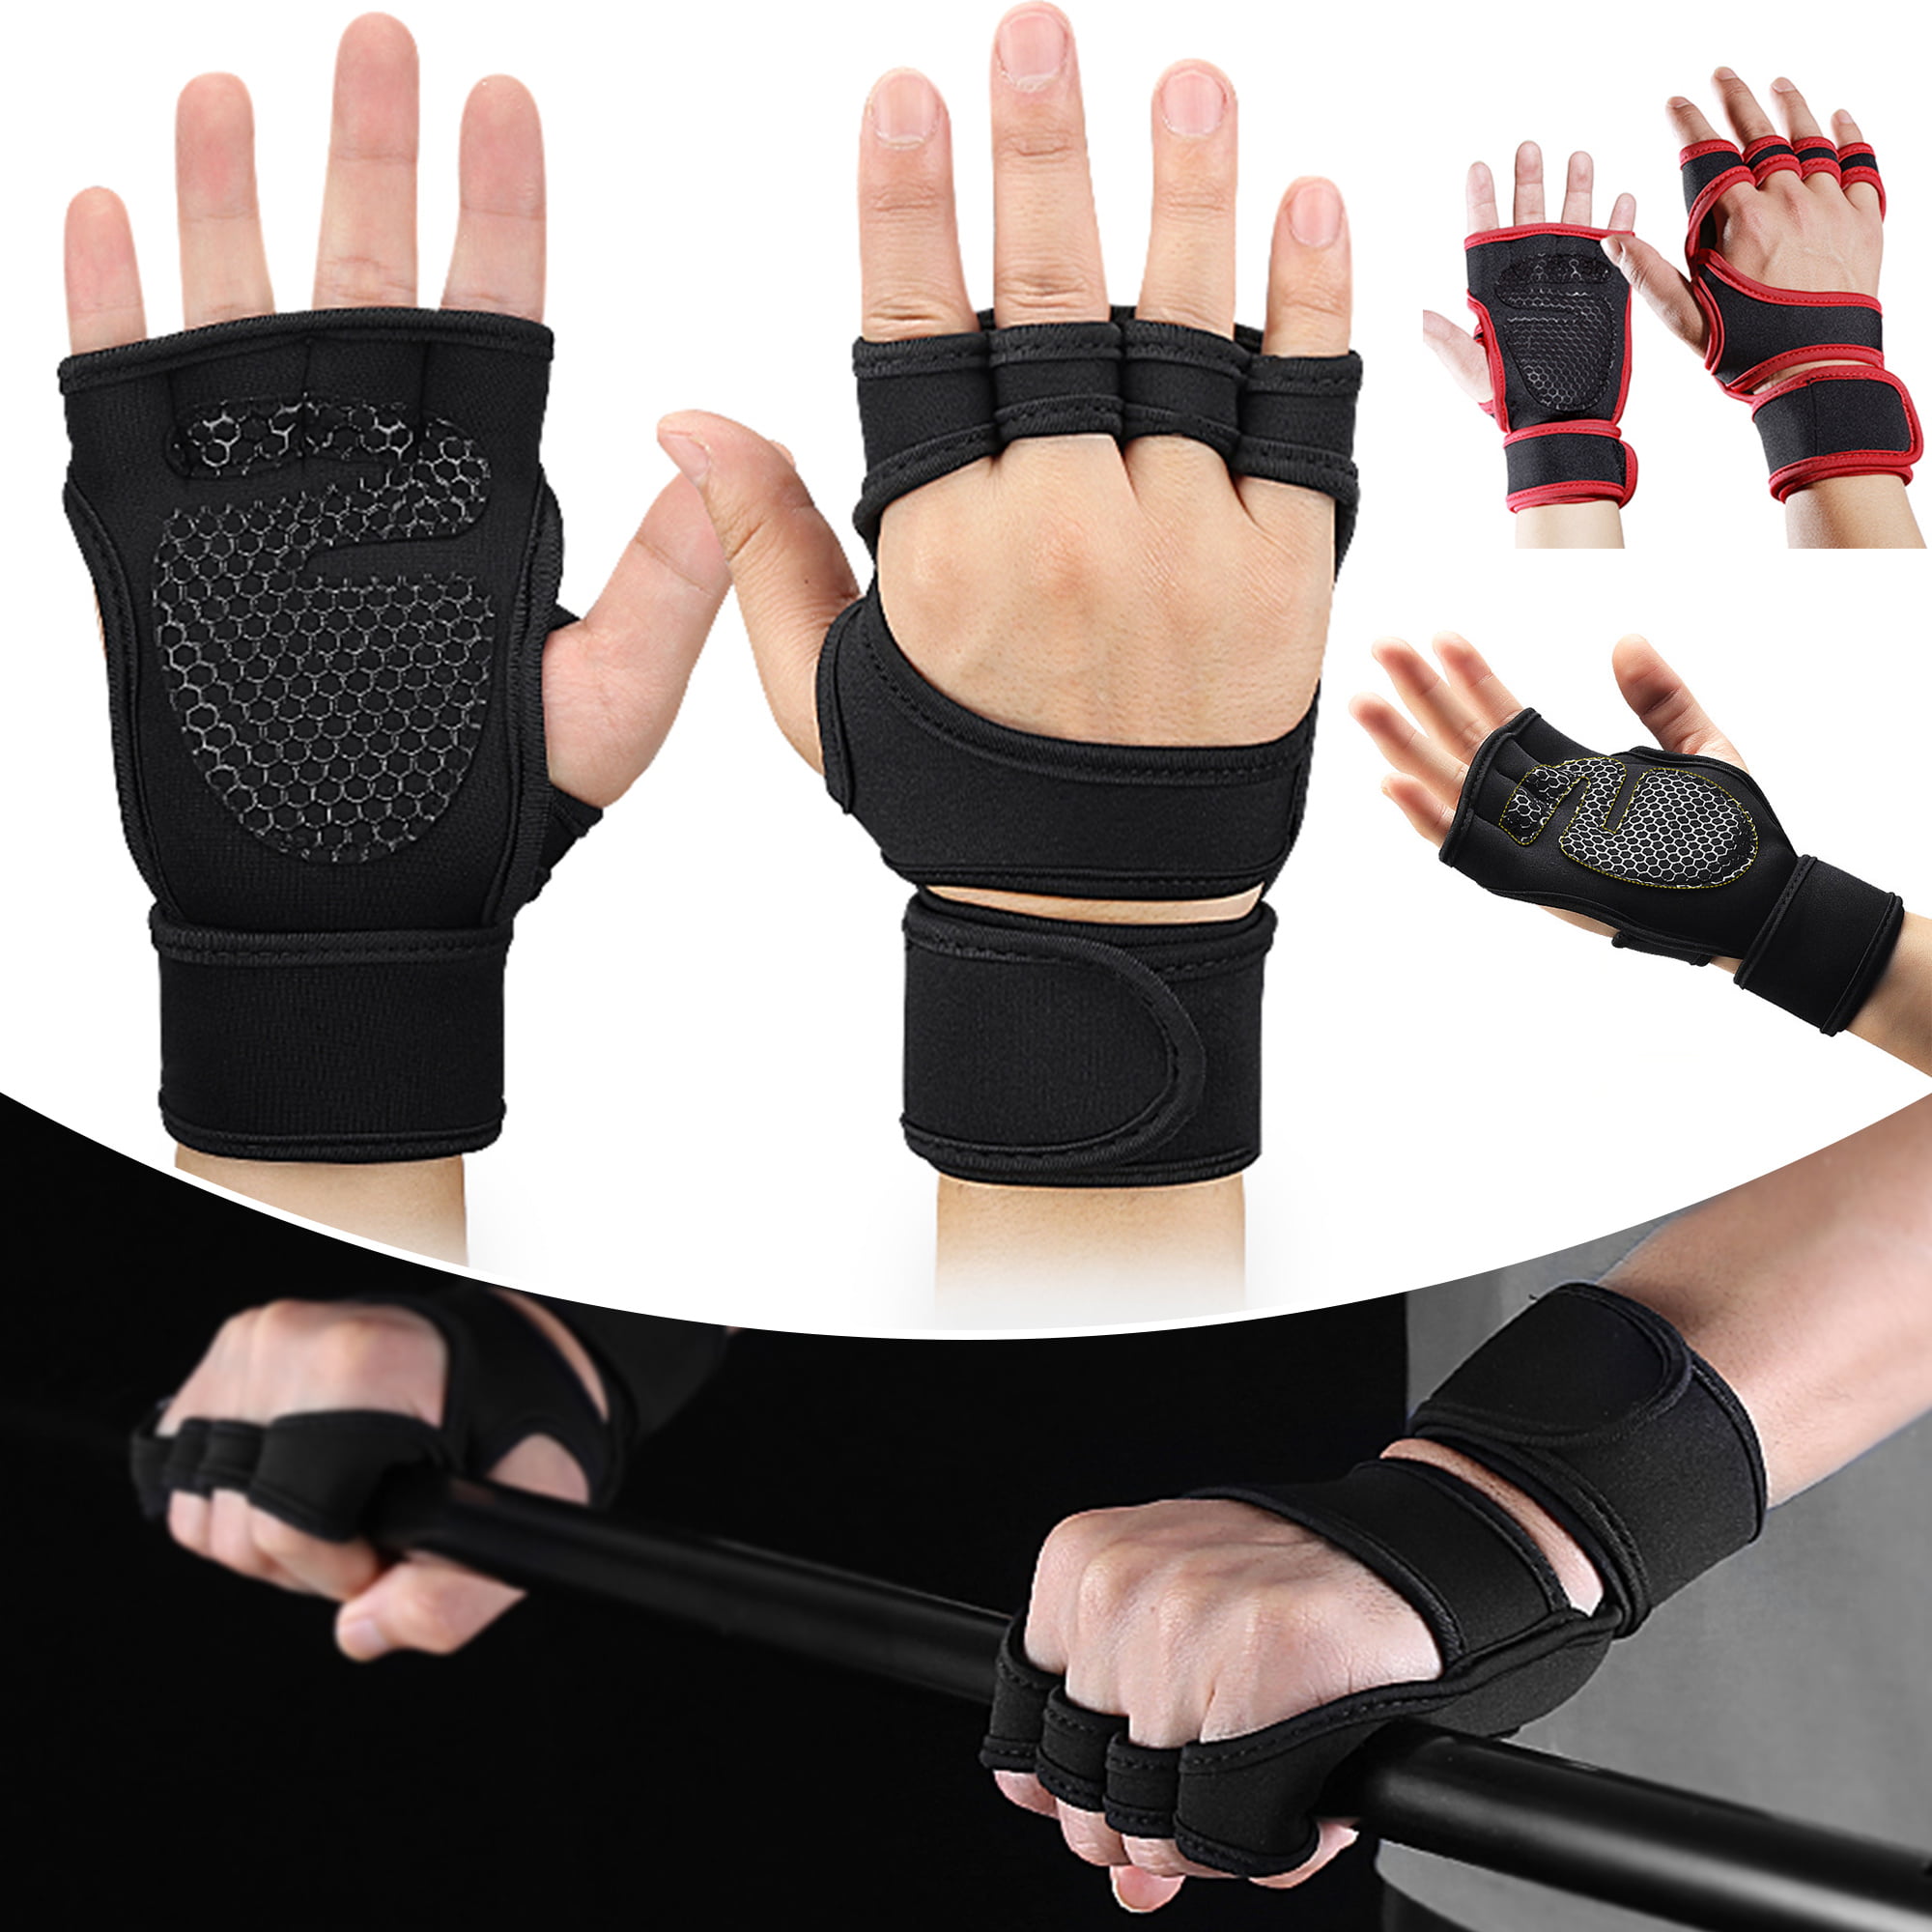 Wrist Wrap Training Sports Fitness Workout Exercise Weightlifting Gym Gloves 